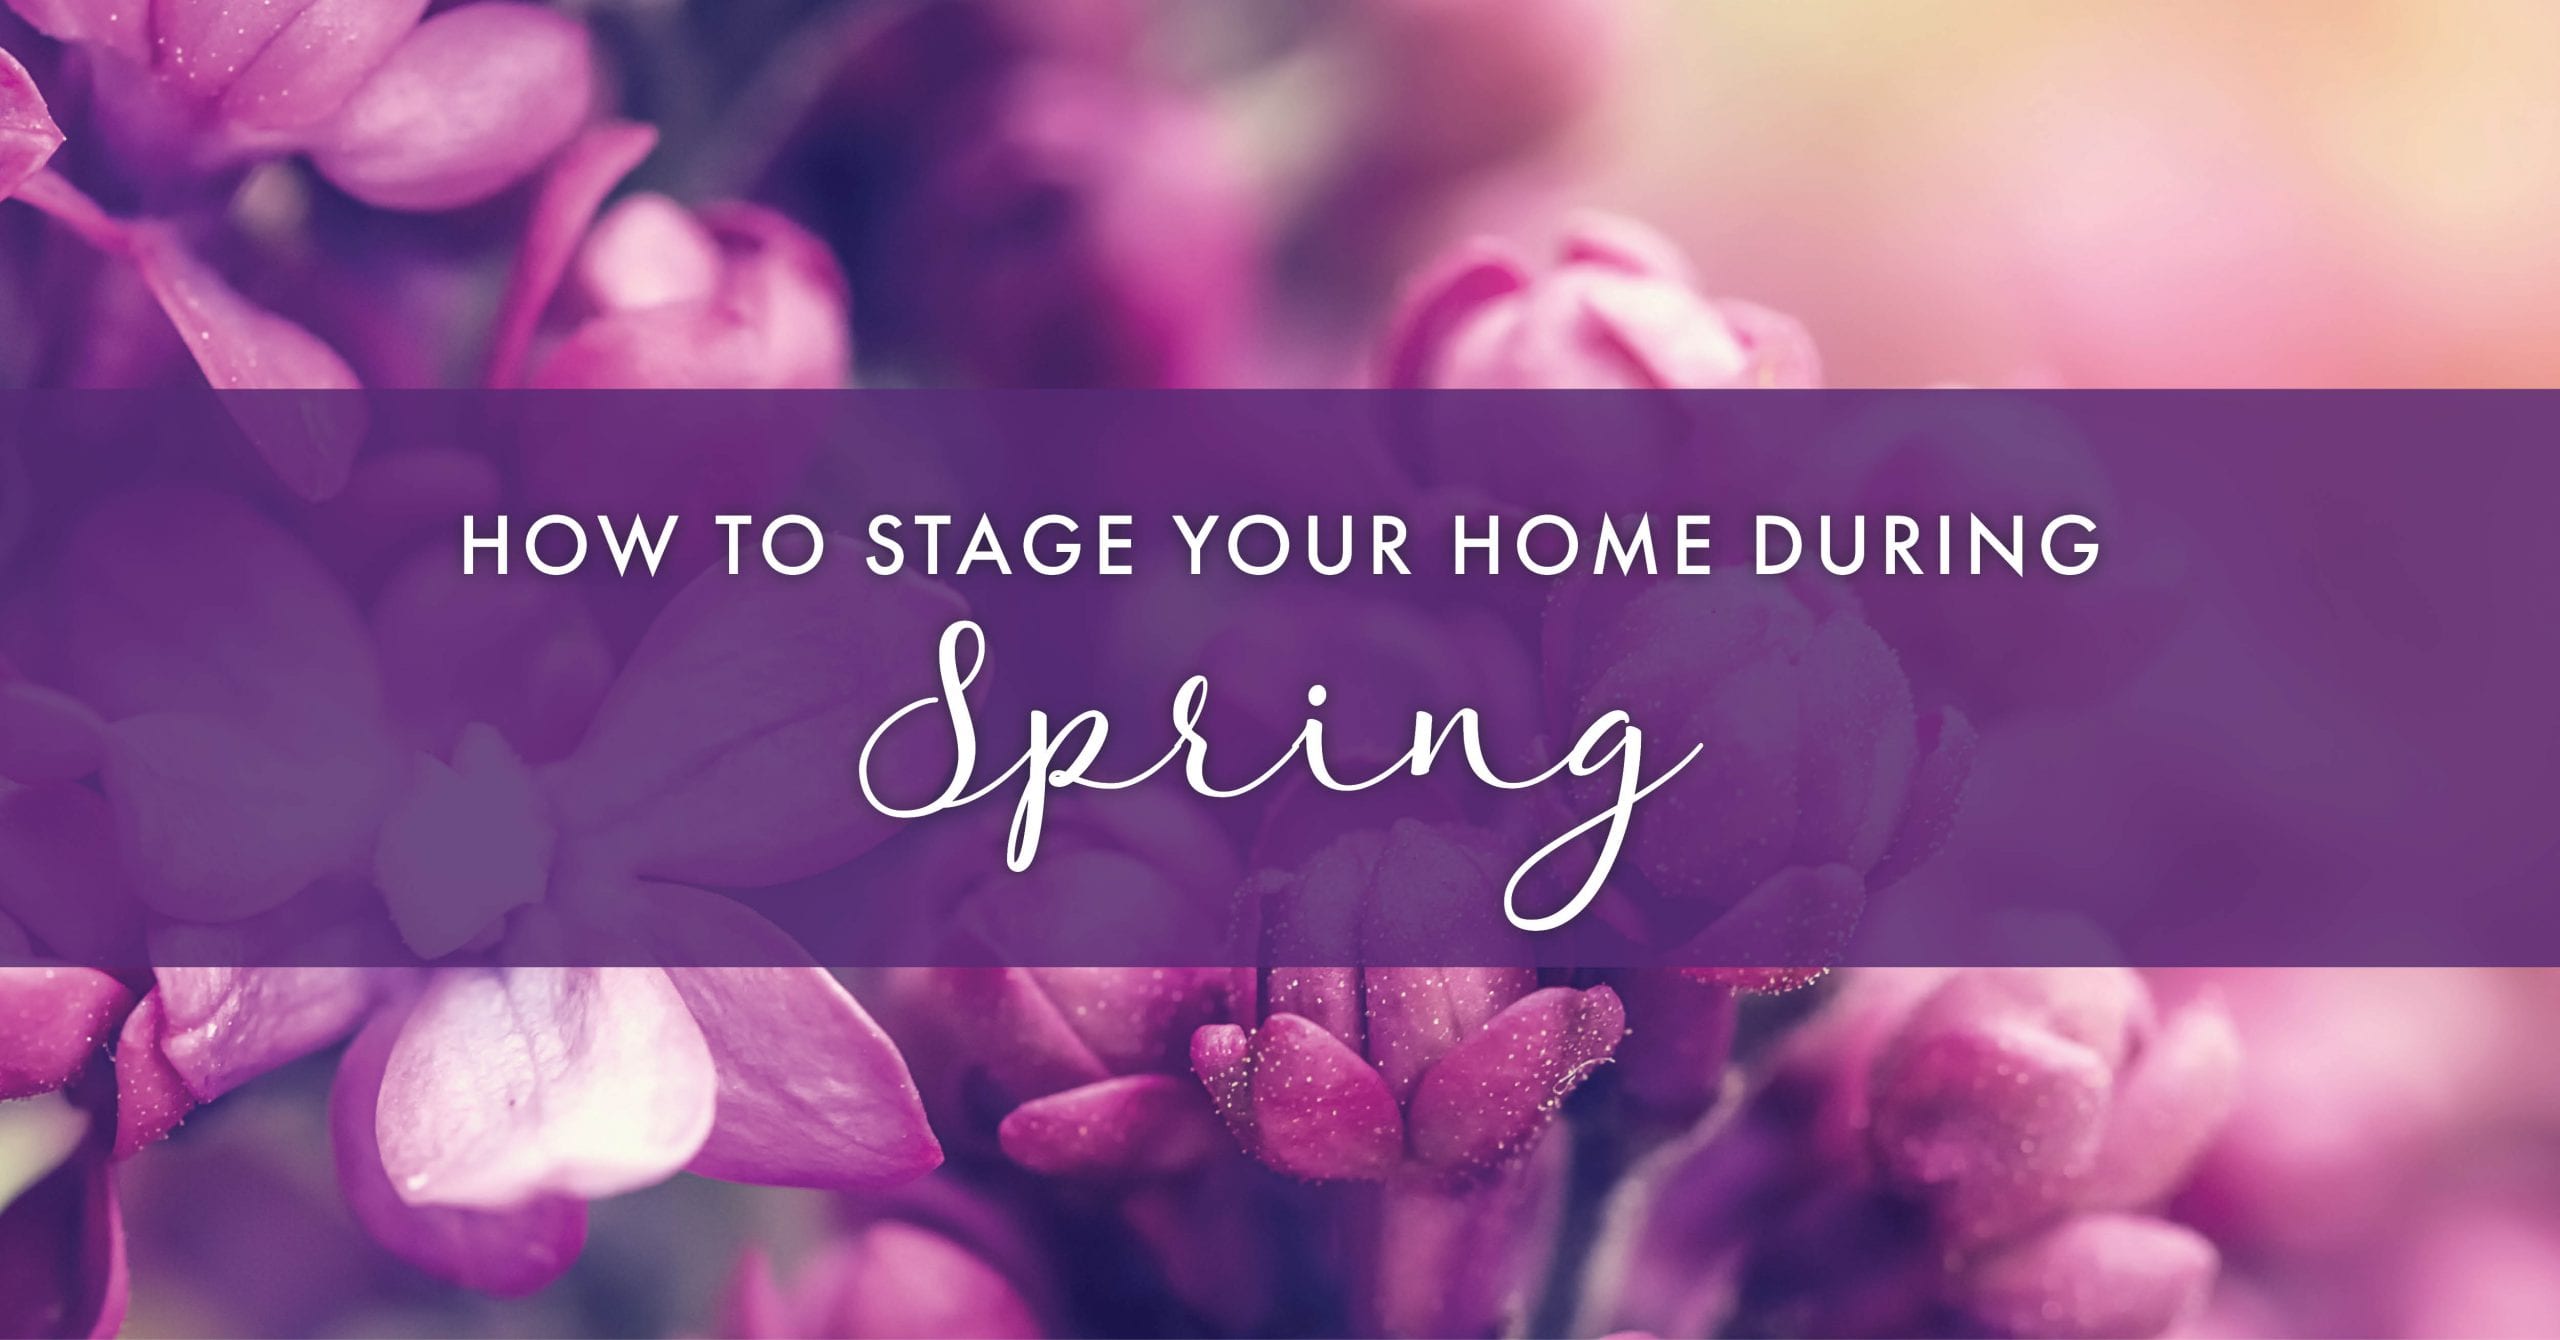 How to Stage Your Home During the Spring